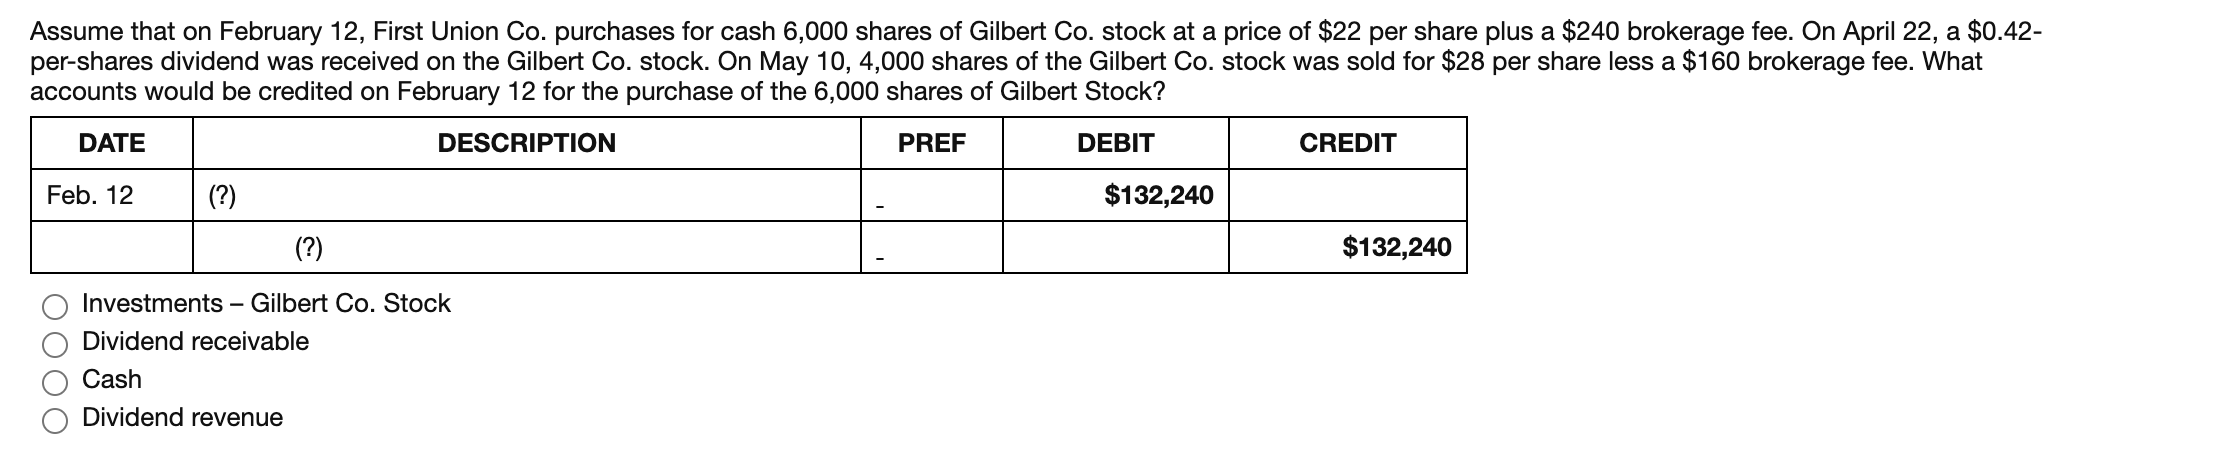 Assume that on February 12, First Union Co. purchases for cash 6,000 shares of Gilbert Co. stock at a price of $22 per share plus a $240 brokerage fee. On April 22, a $0.42-
per-shares dividend was received on the Gilbert Co. stock. On May 10, 4,000 shares of the Gilbert Co. stock was sold for $28 per share less a $160 brokerage fee. What
accounts would be credited on February 12 for the purchase of the 6,000 shares of Gilbert Stock?
DATE
DESCRIPTION
PREF
DEBIT
CREDIT
Feb. 12
(?)
$132,240
(?)
$132,240
Investments – Gilbert Co. Stock
Dividend receivable
Cash
Dividend revenue
